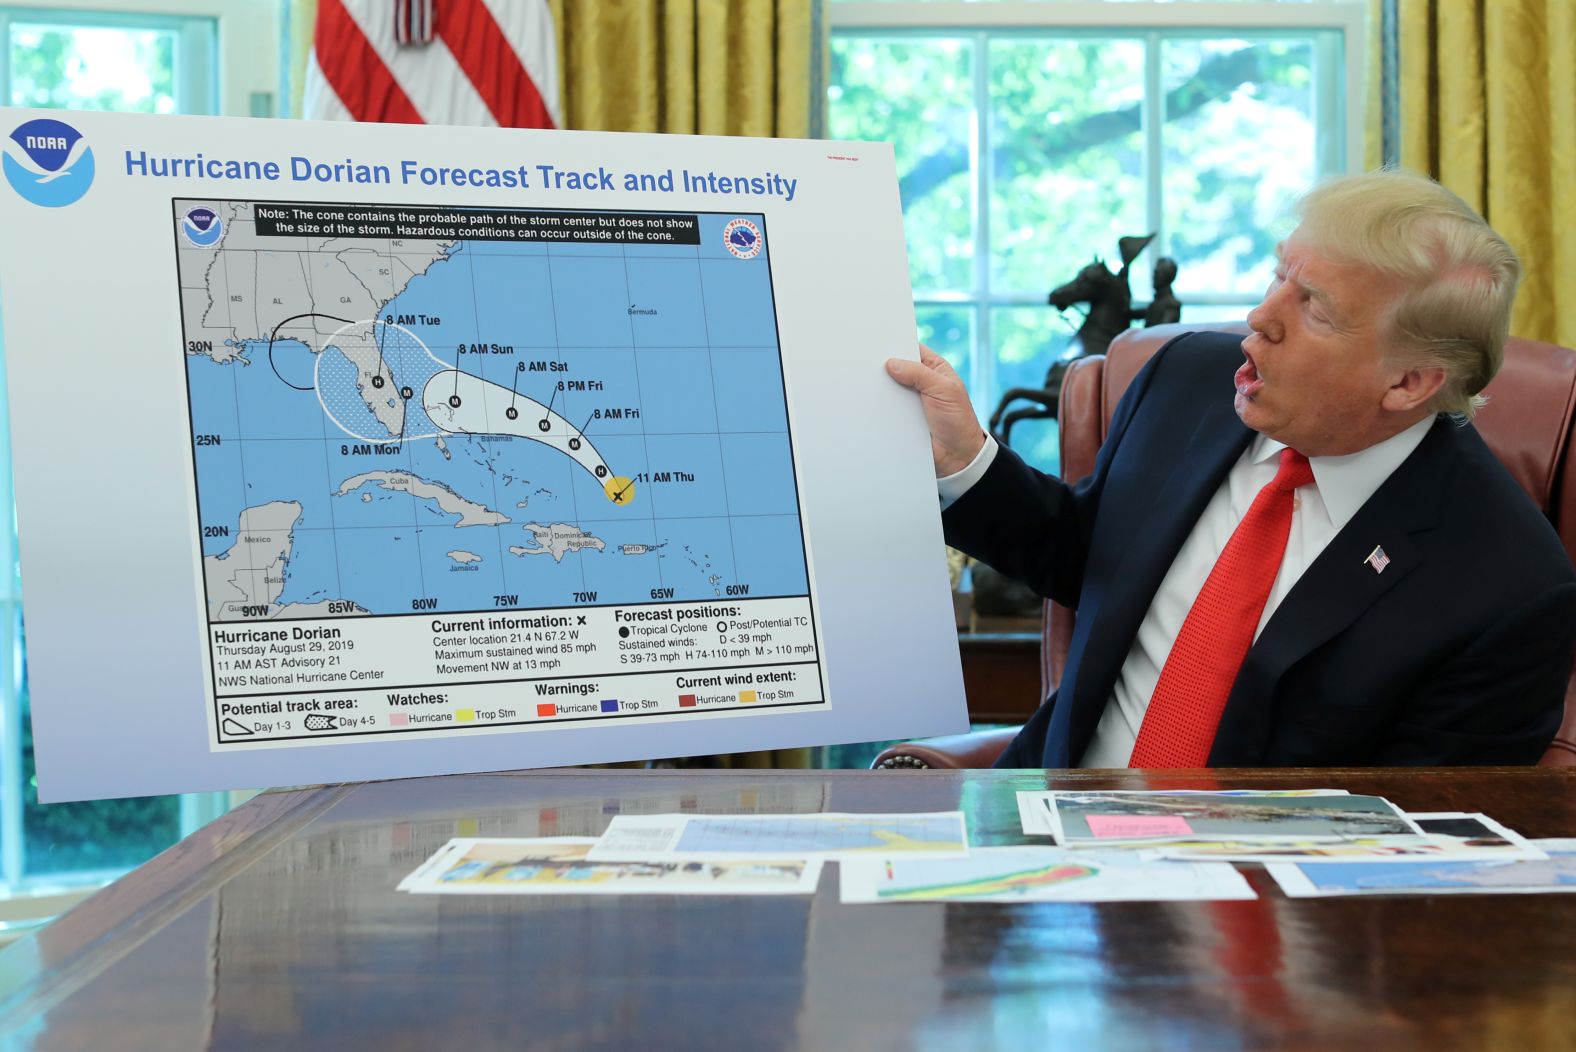 In September 2019, Trump shows an <a href="index.php?page=&url=https%3A%2F%2Fwww.cnn.com%2F2019%2F09%2F04%2Fpolitics%2Fdonald-trump-hurricane-alabama-map%2Findex.html" target="_blank">apparently altered map</a> of Hurricane Dorian's trajectory. The map showed the storm potentially affecting a large section of Alabama. Over the course of the storm's development, Trump erroneously claimed multiple times that Alabama had been in the storm's path.